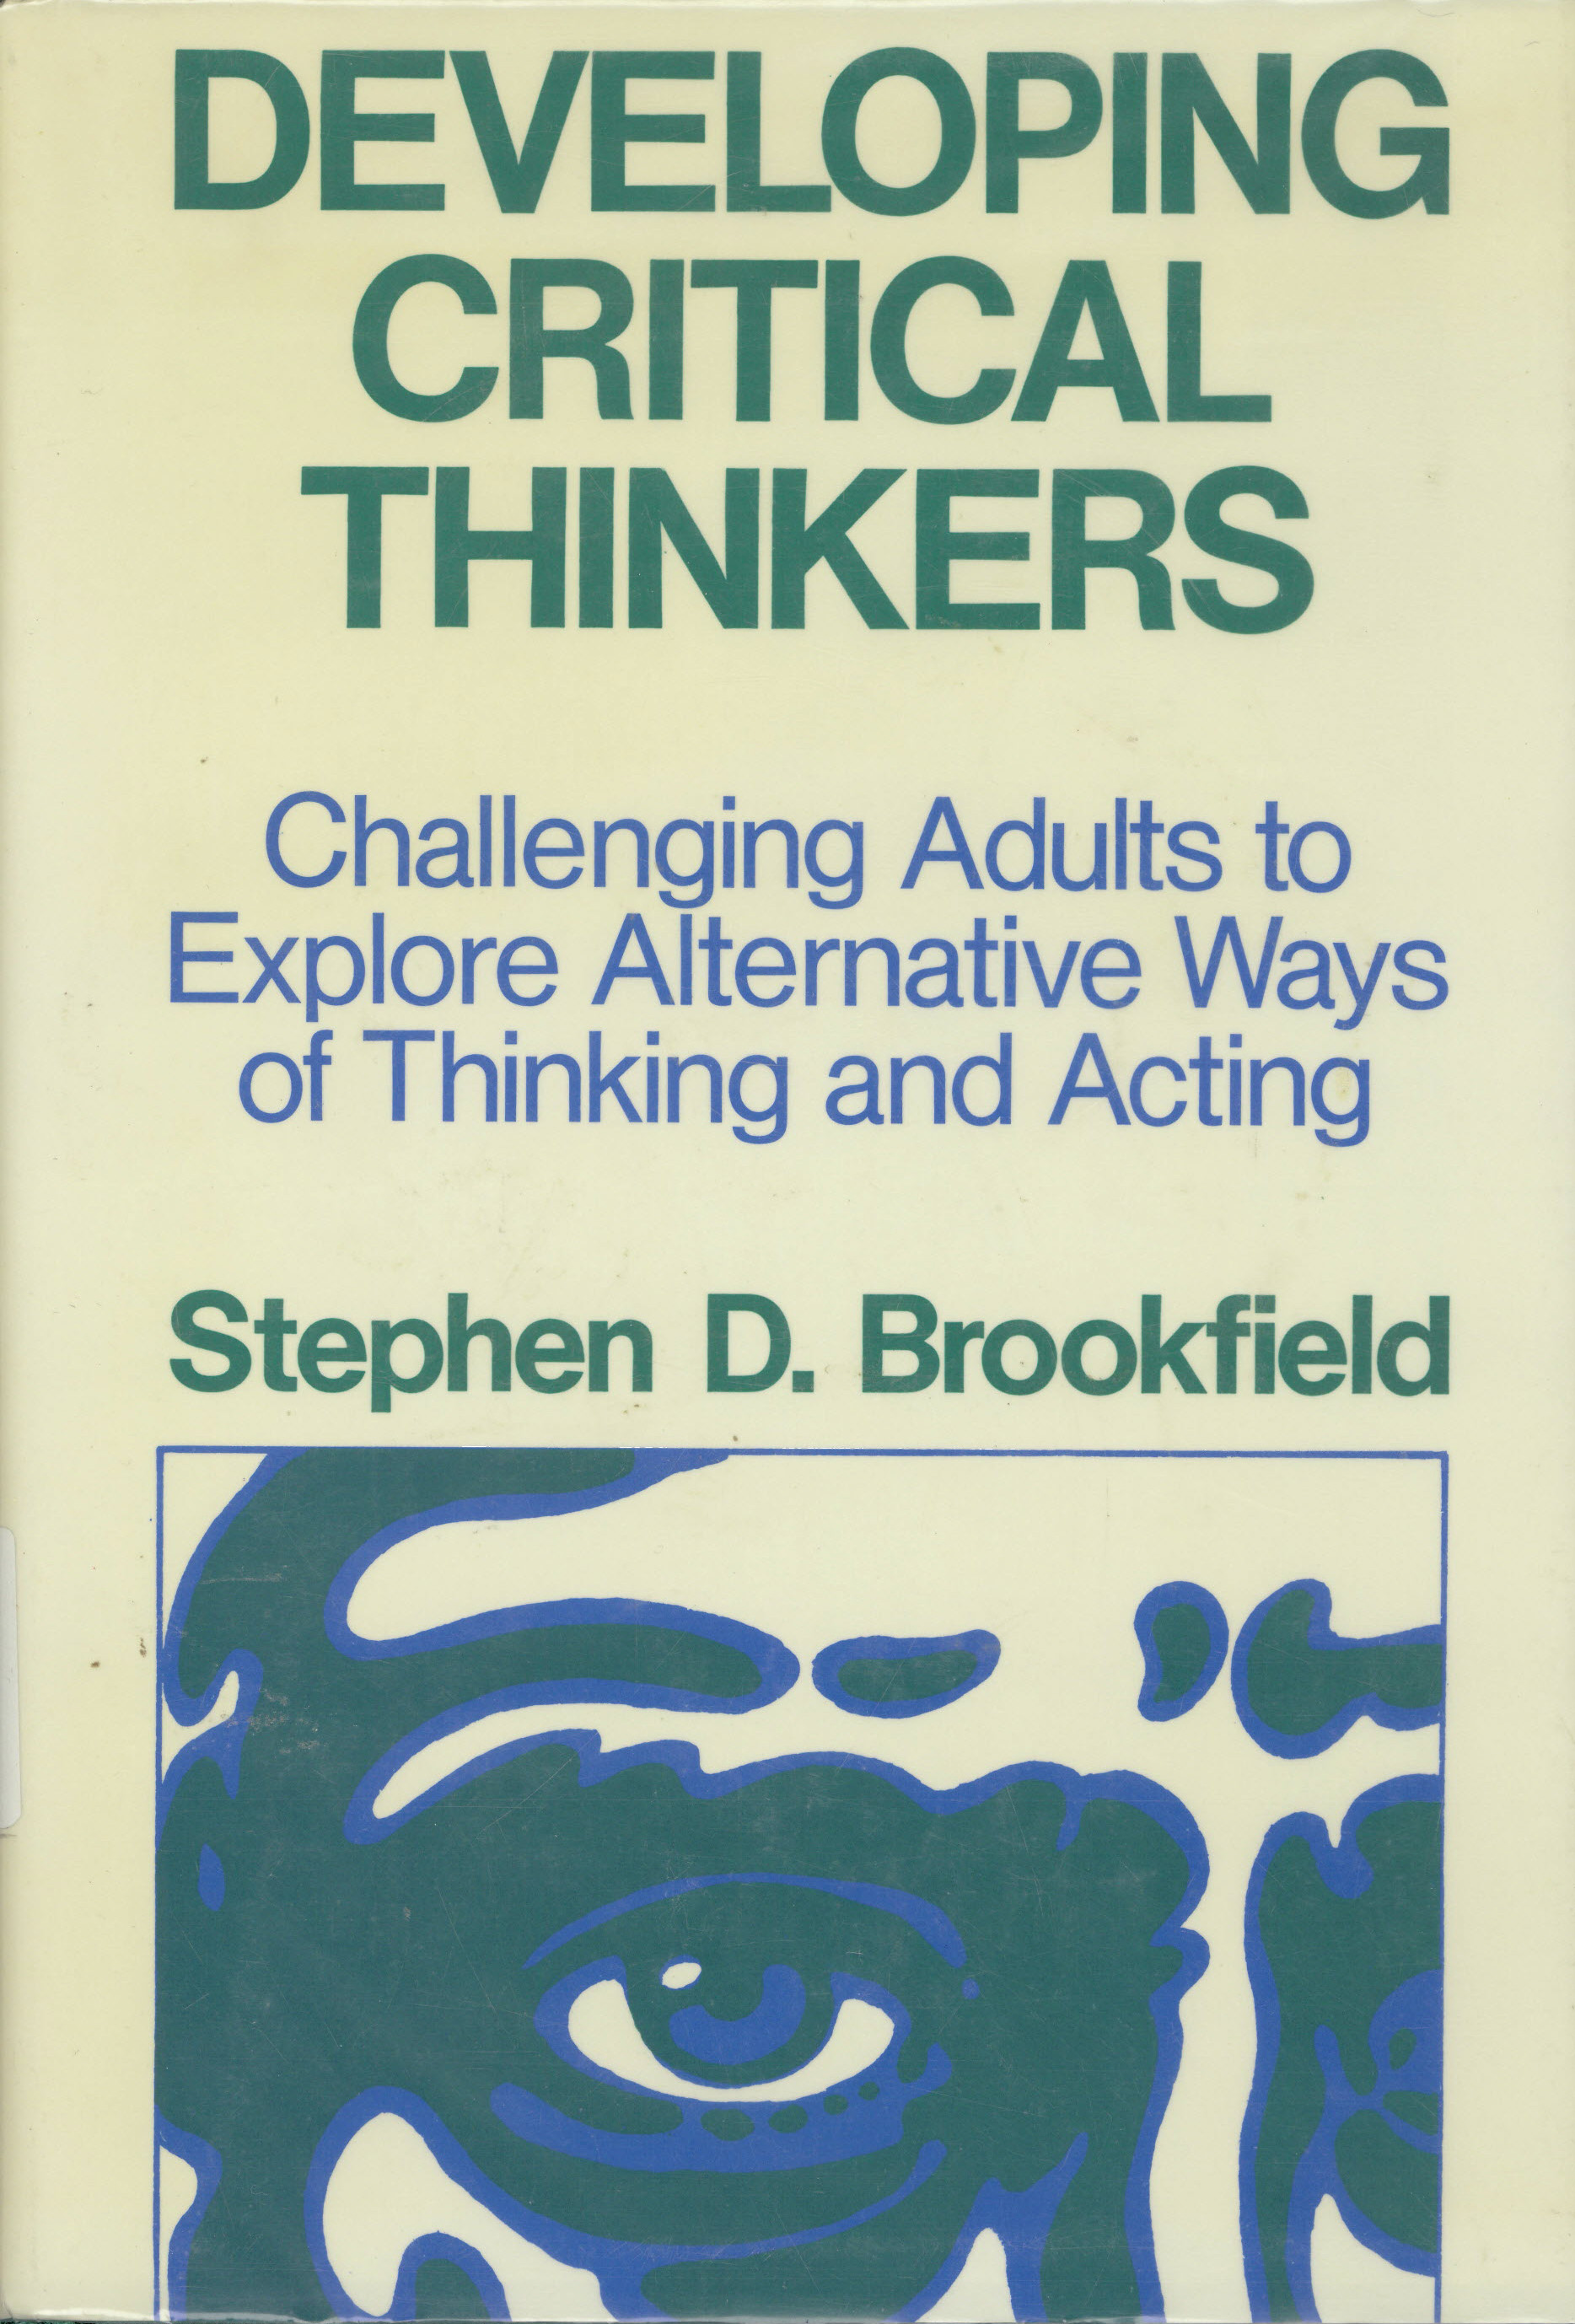 Developing critical thinkers